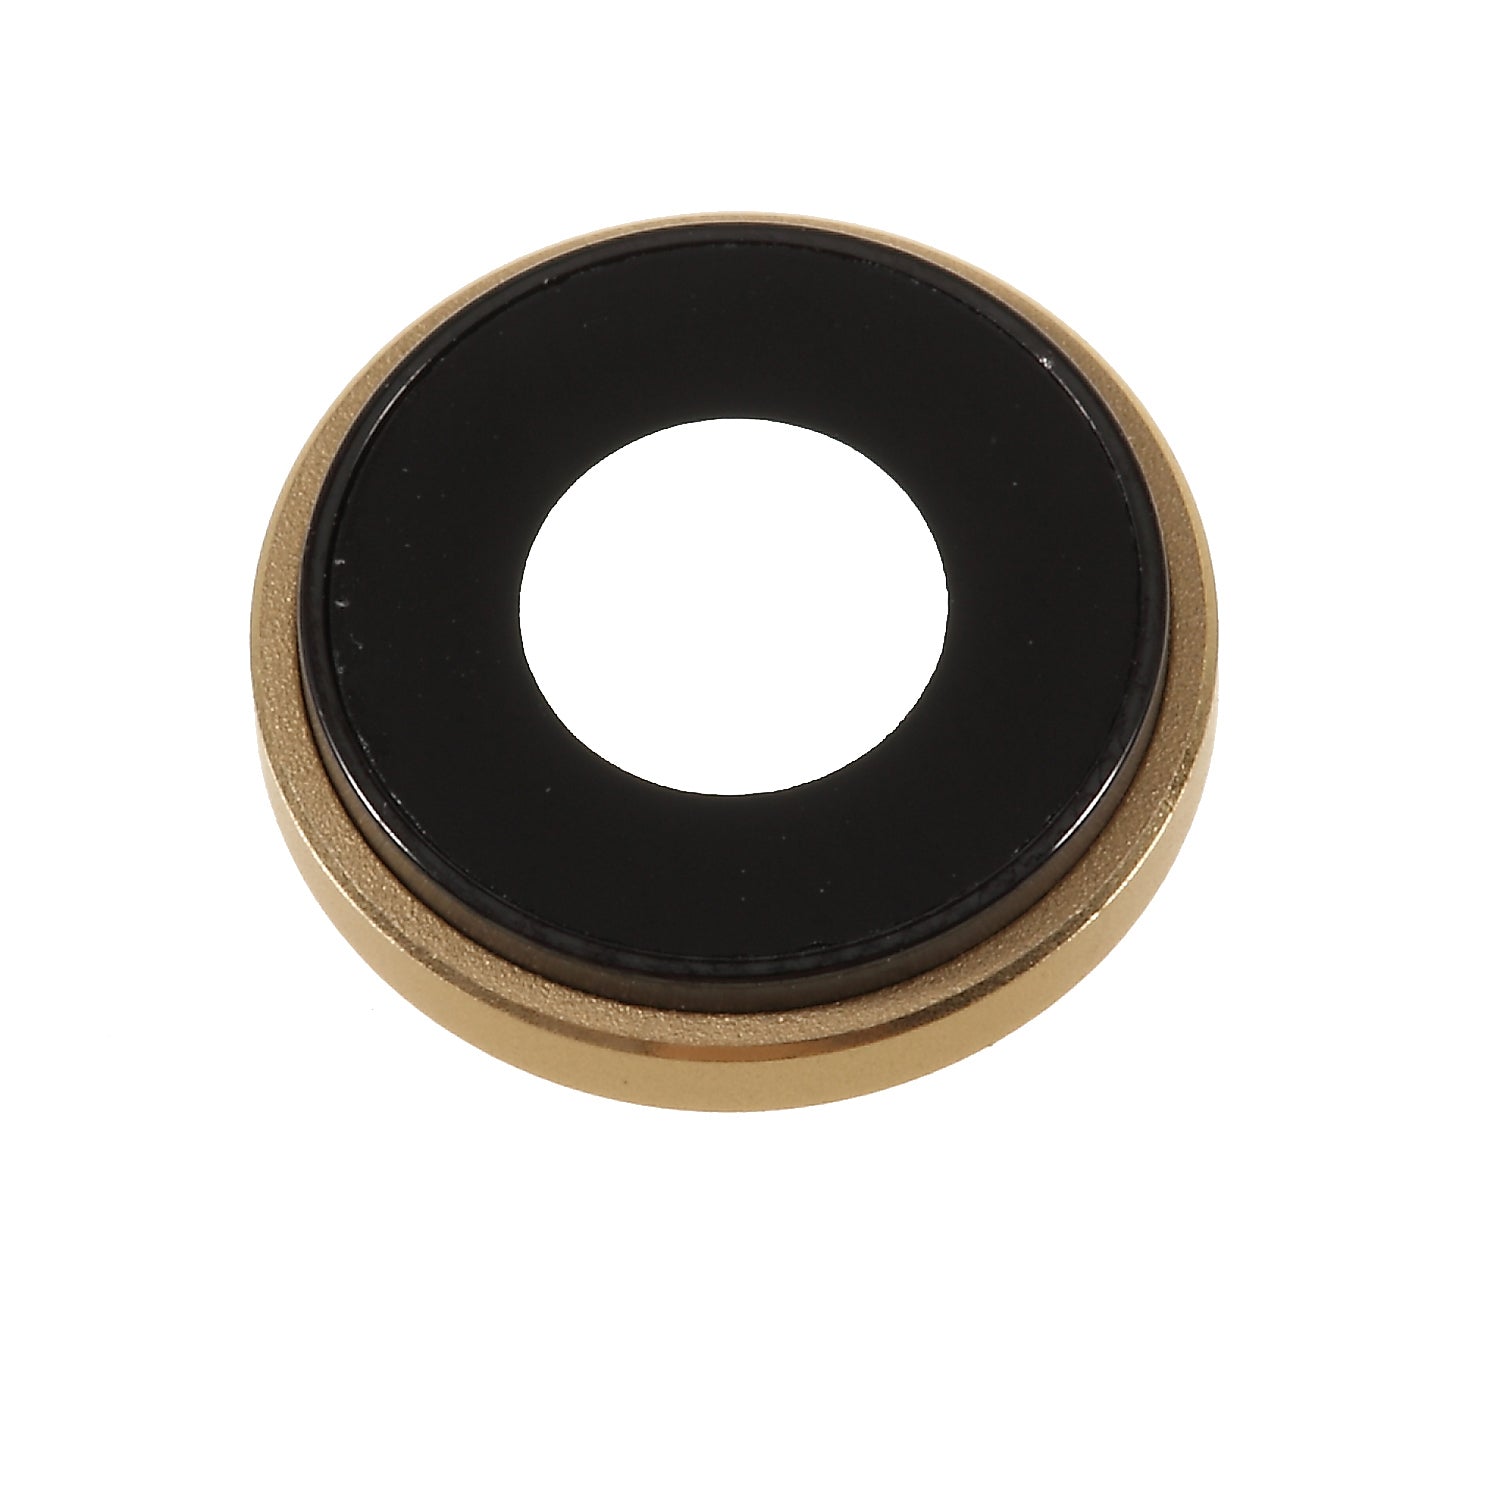 Rear Camera Lens Ring Cover with Glass Lens for iPhone XR 6.1 inch - Gold